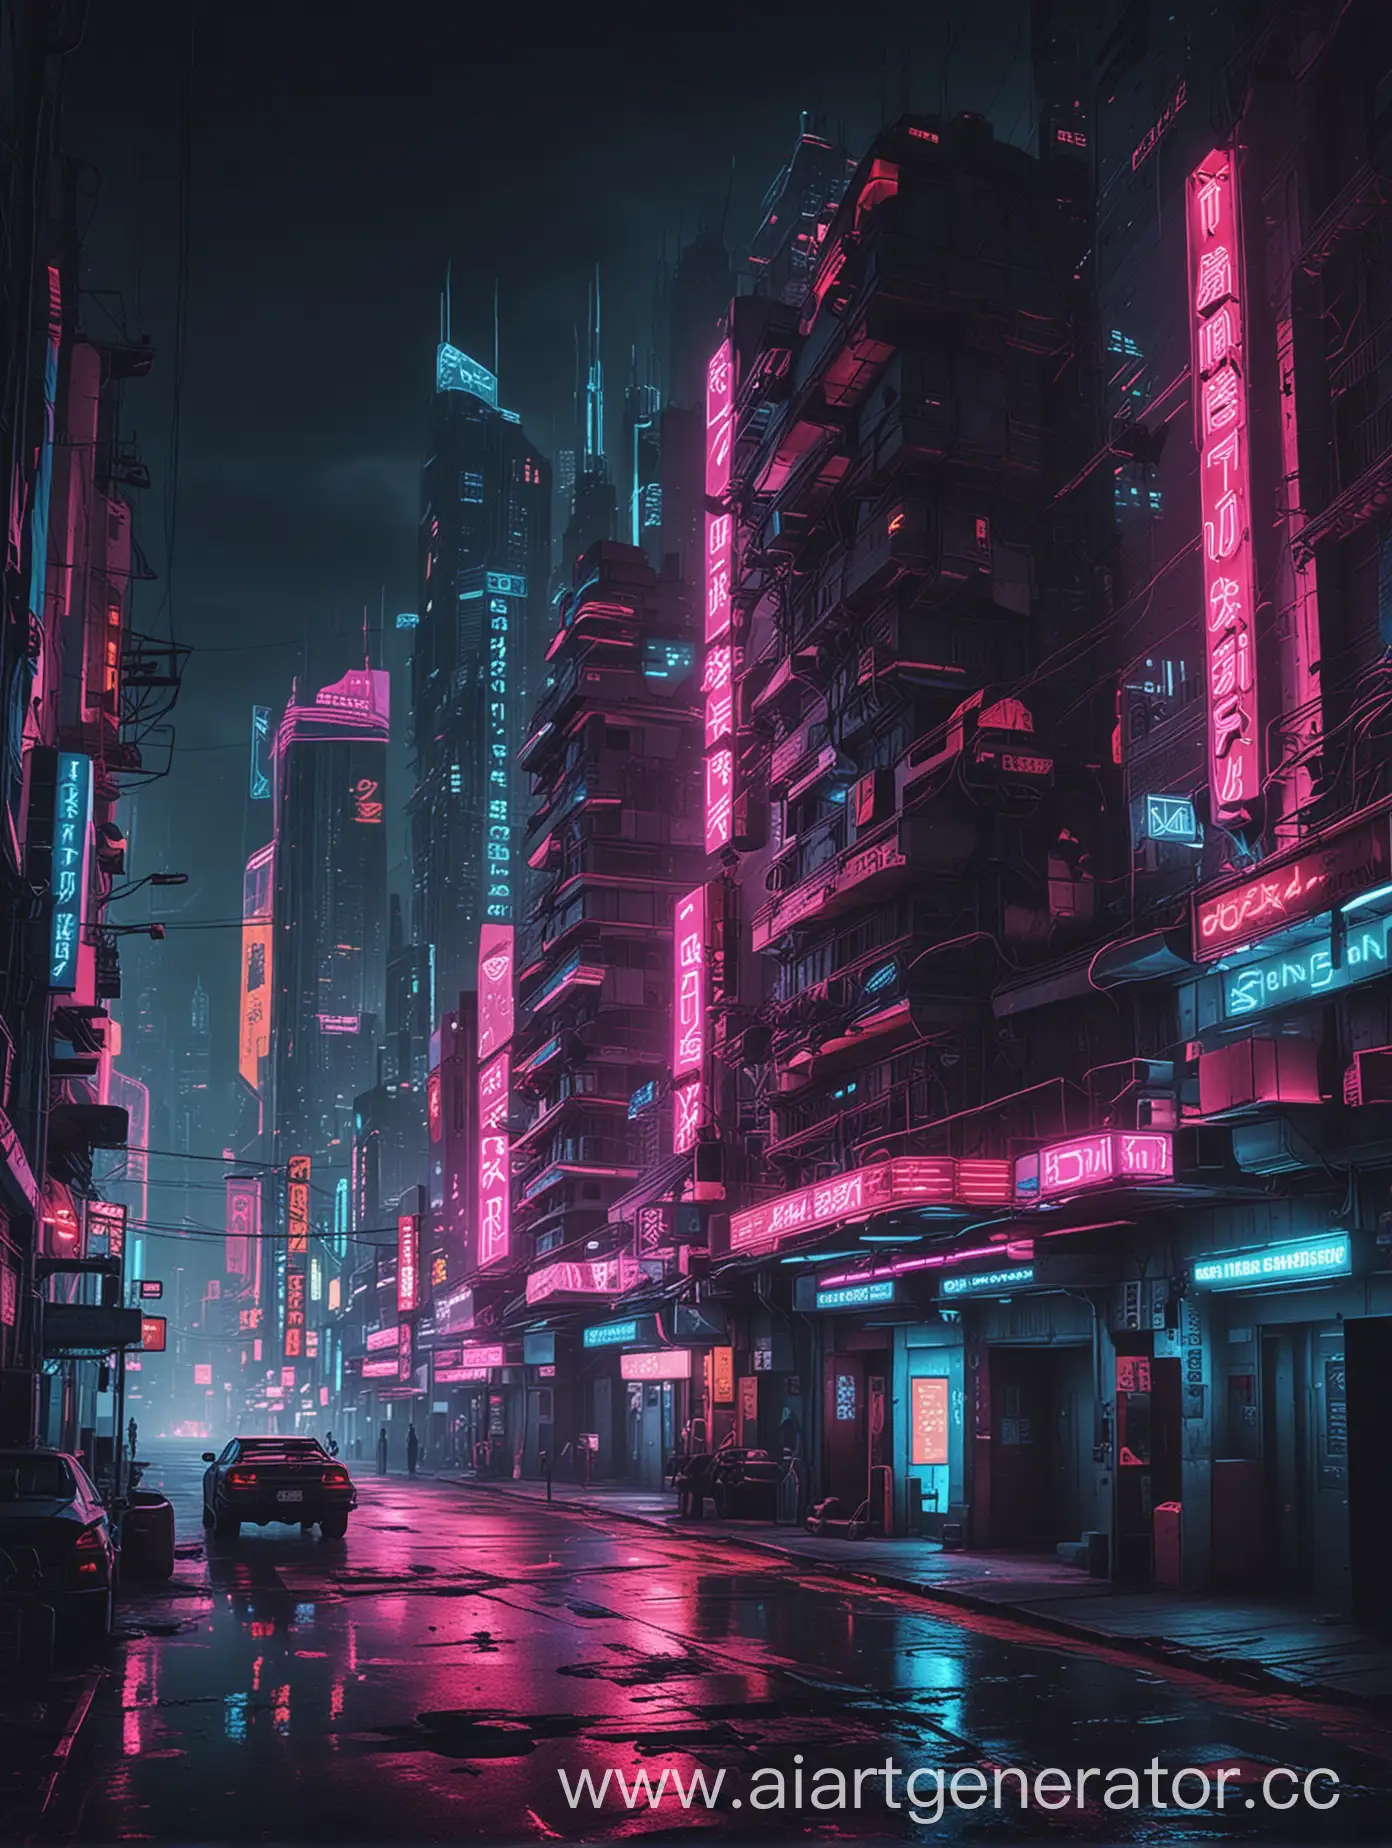 Neon-City-in-Cyberpunk-Style-Futuristic-Urban-Landscape-with-Glowing-Lights